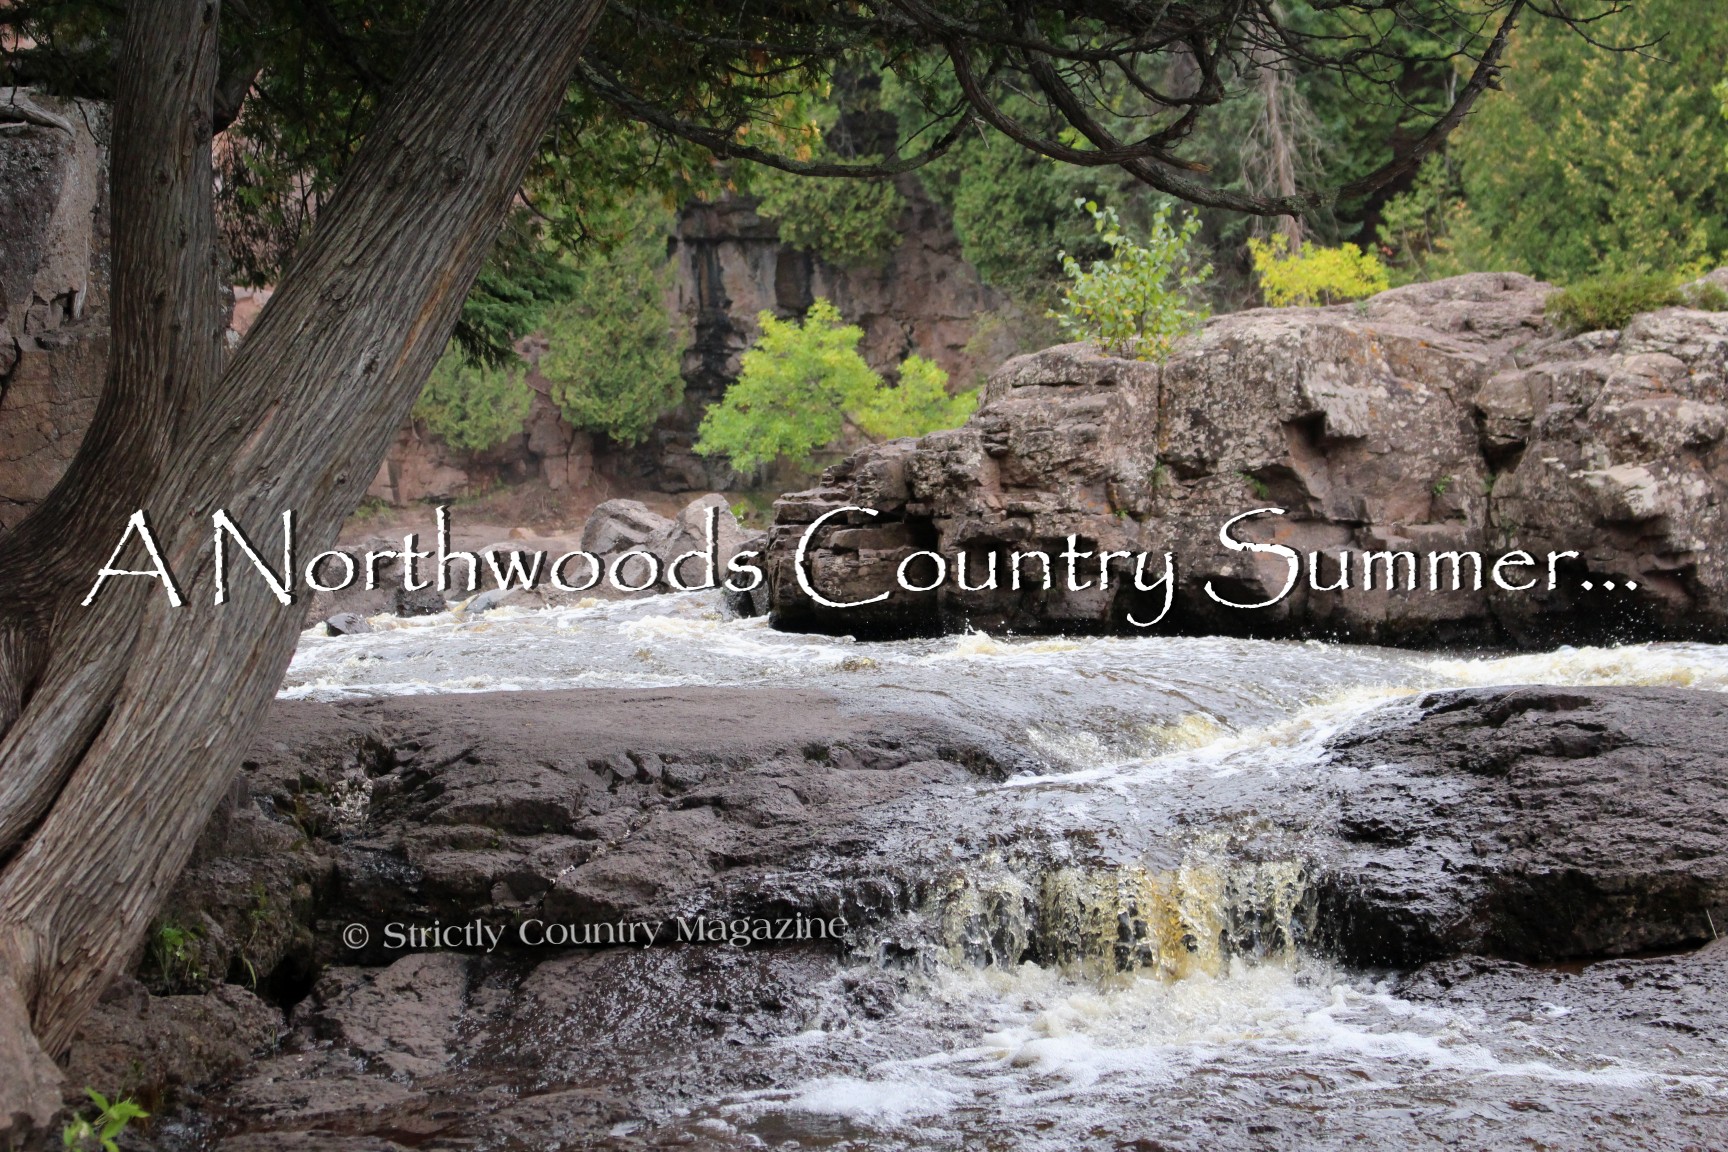 Strictly Country copyright A Northwoods Country Summer title